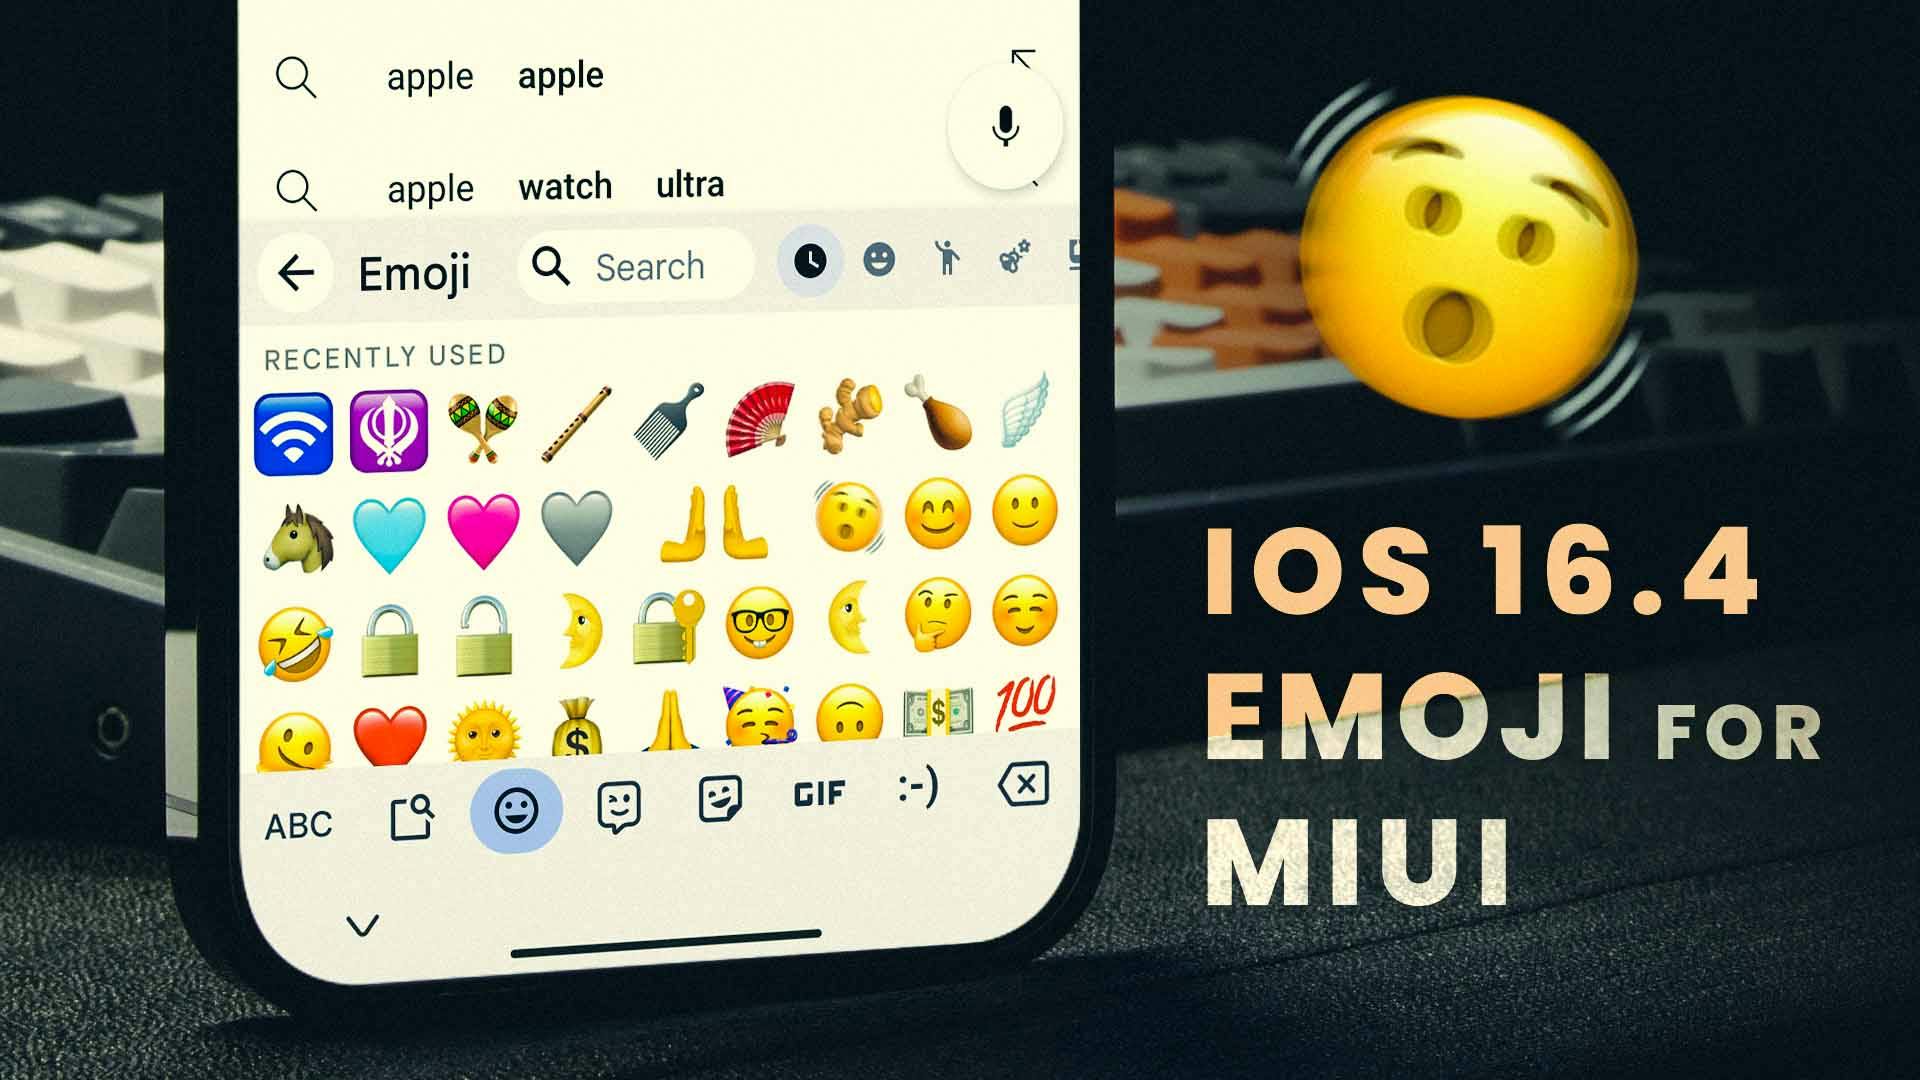 Unleash Your Emoji Game: Apply iOS 16.4 Emojis on MiUI Devices Without ROOOT